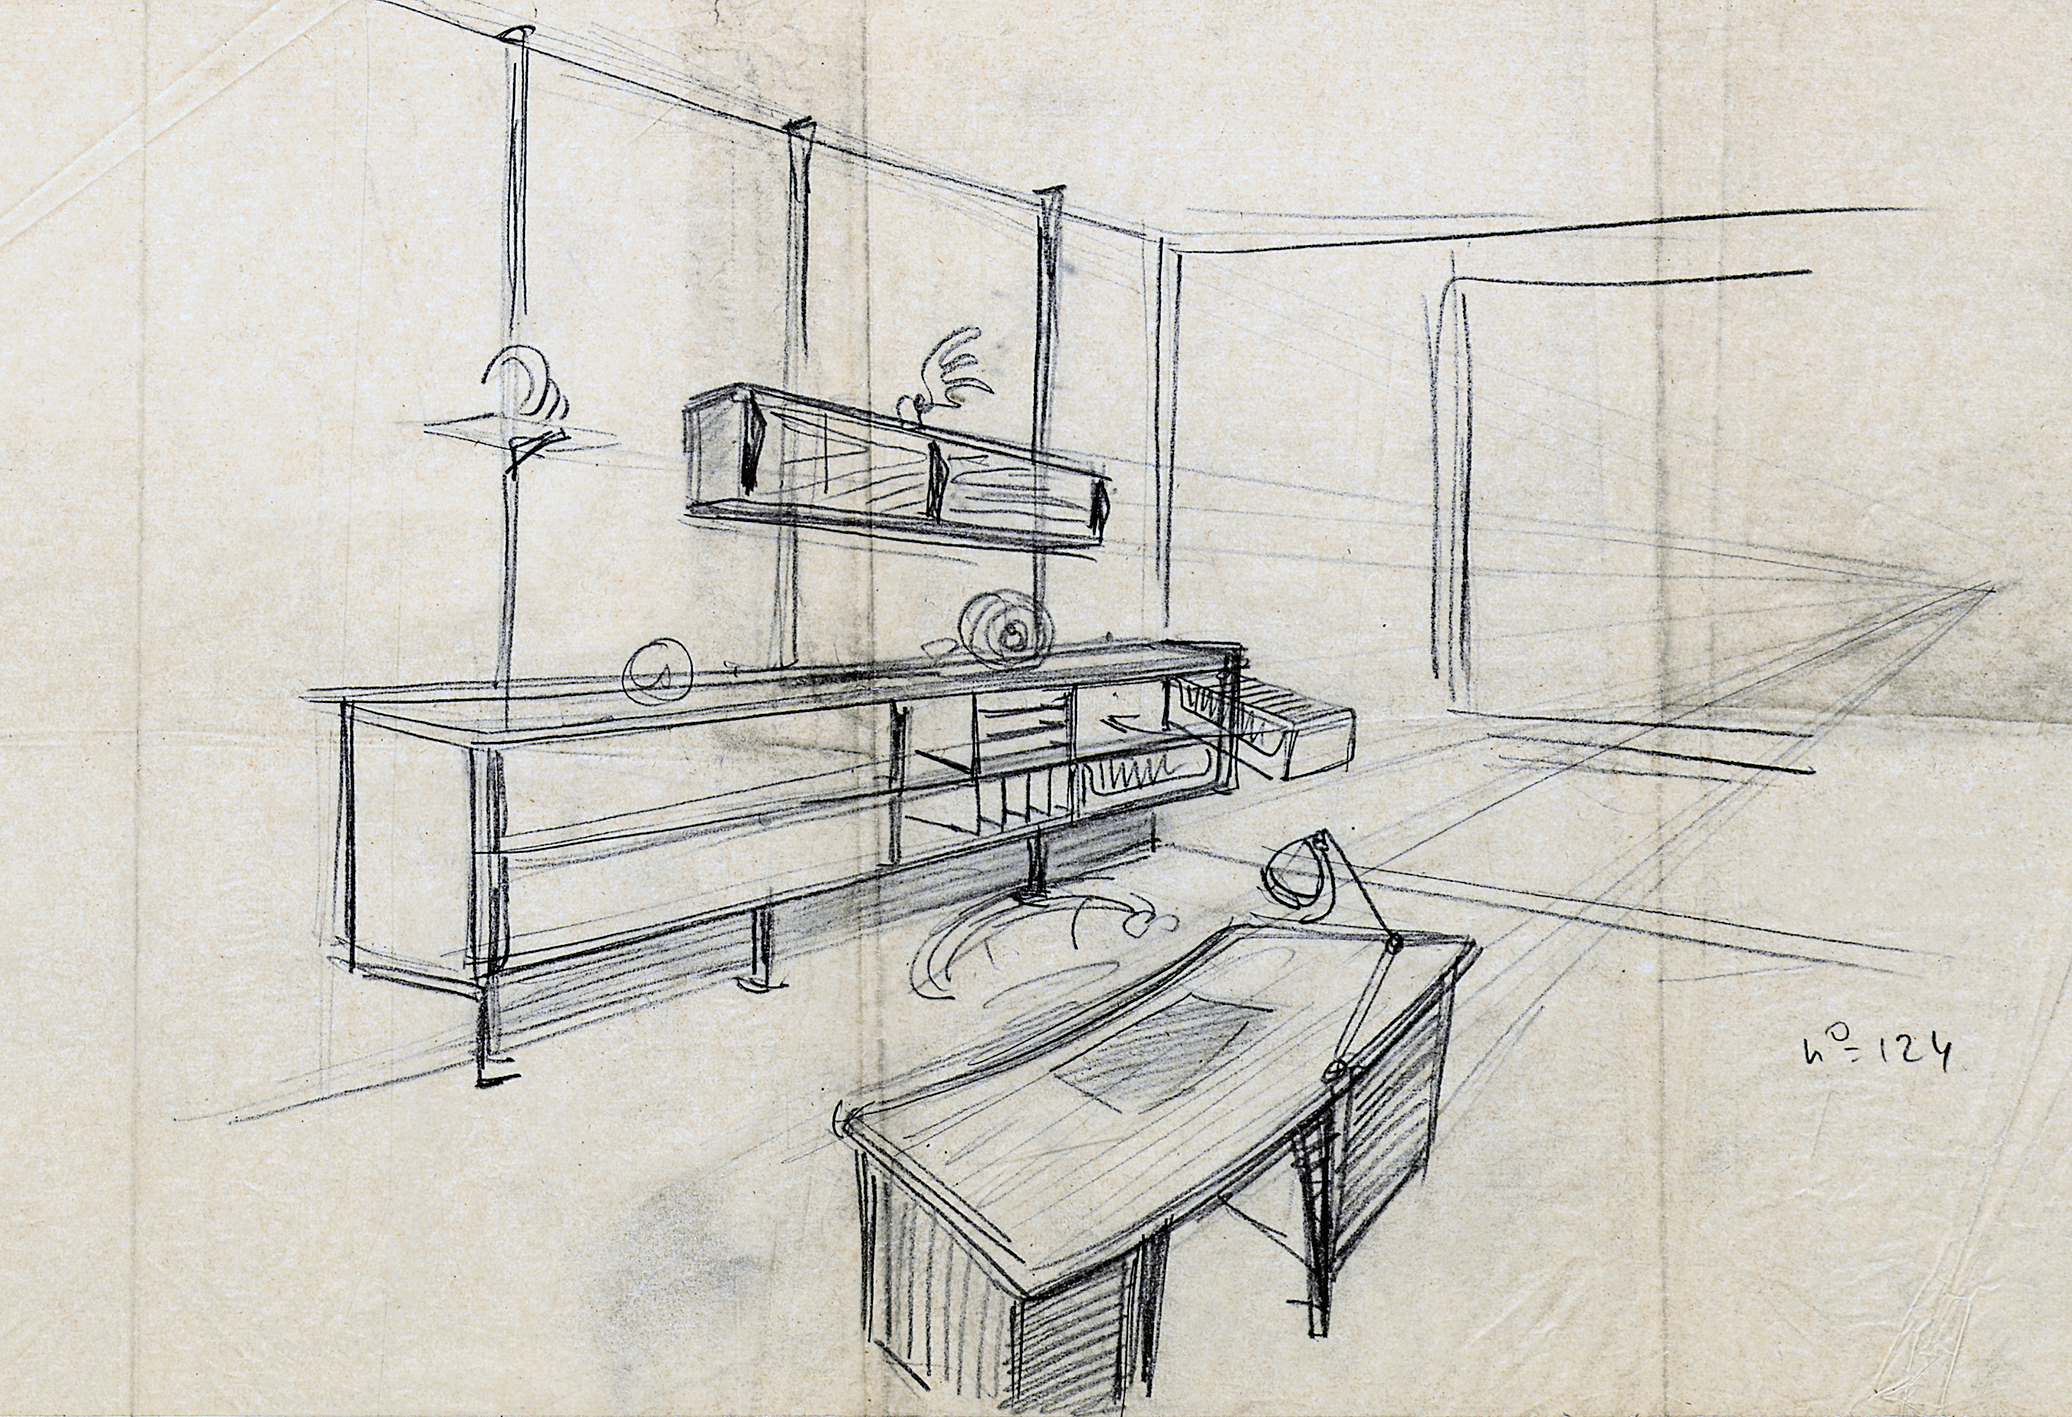 Mr Labourier’s office. Ateliers Jean Prouvé overall view, preliminary sketch, January 1943.